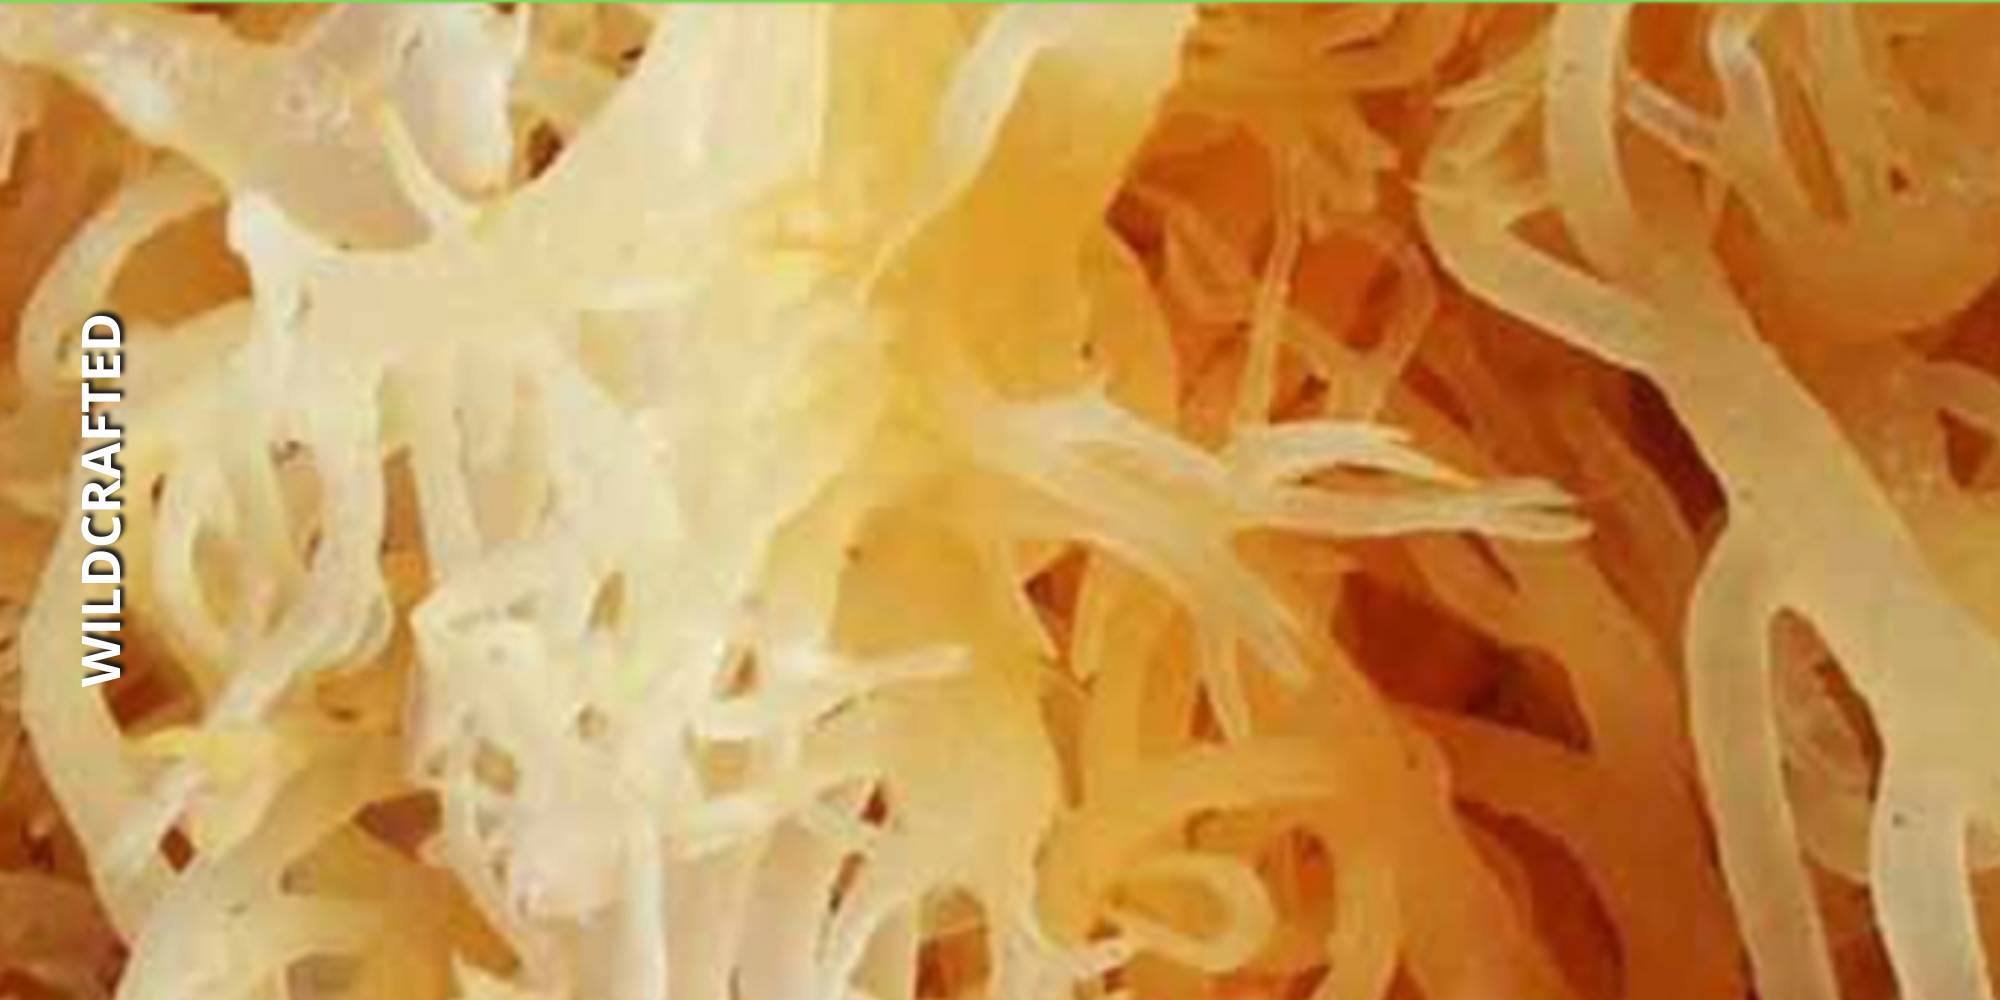 Wildcrafted sea moss